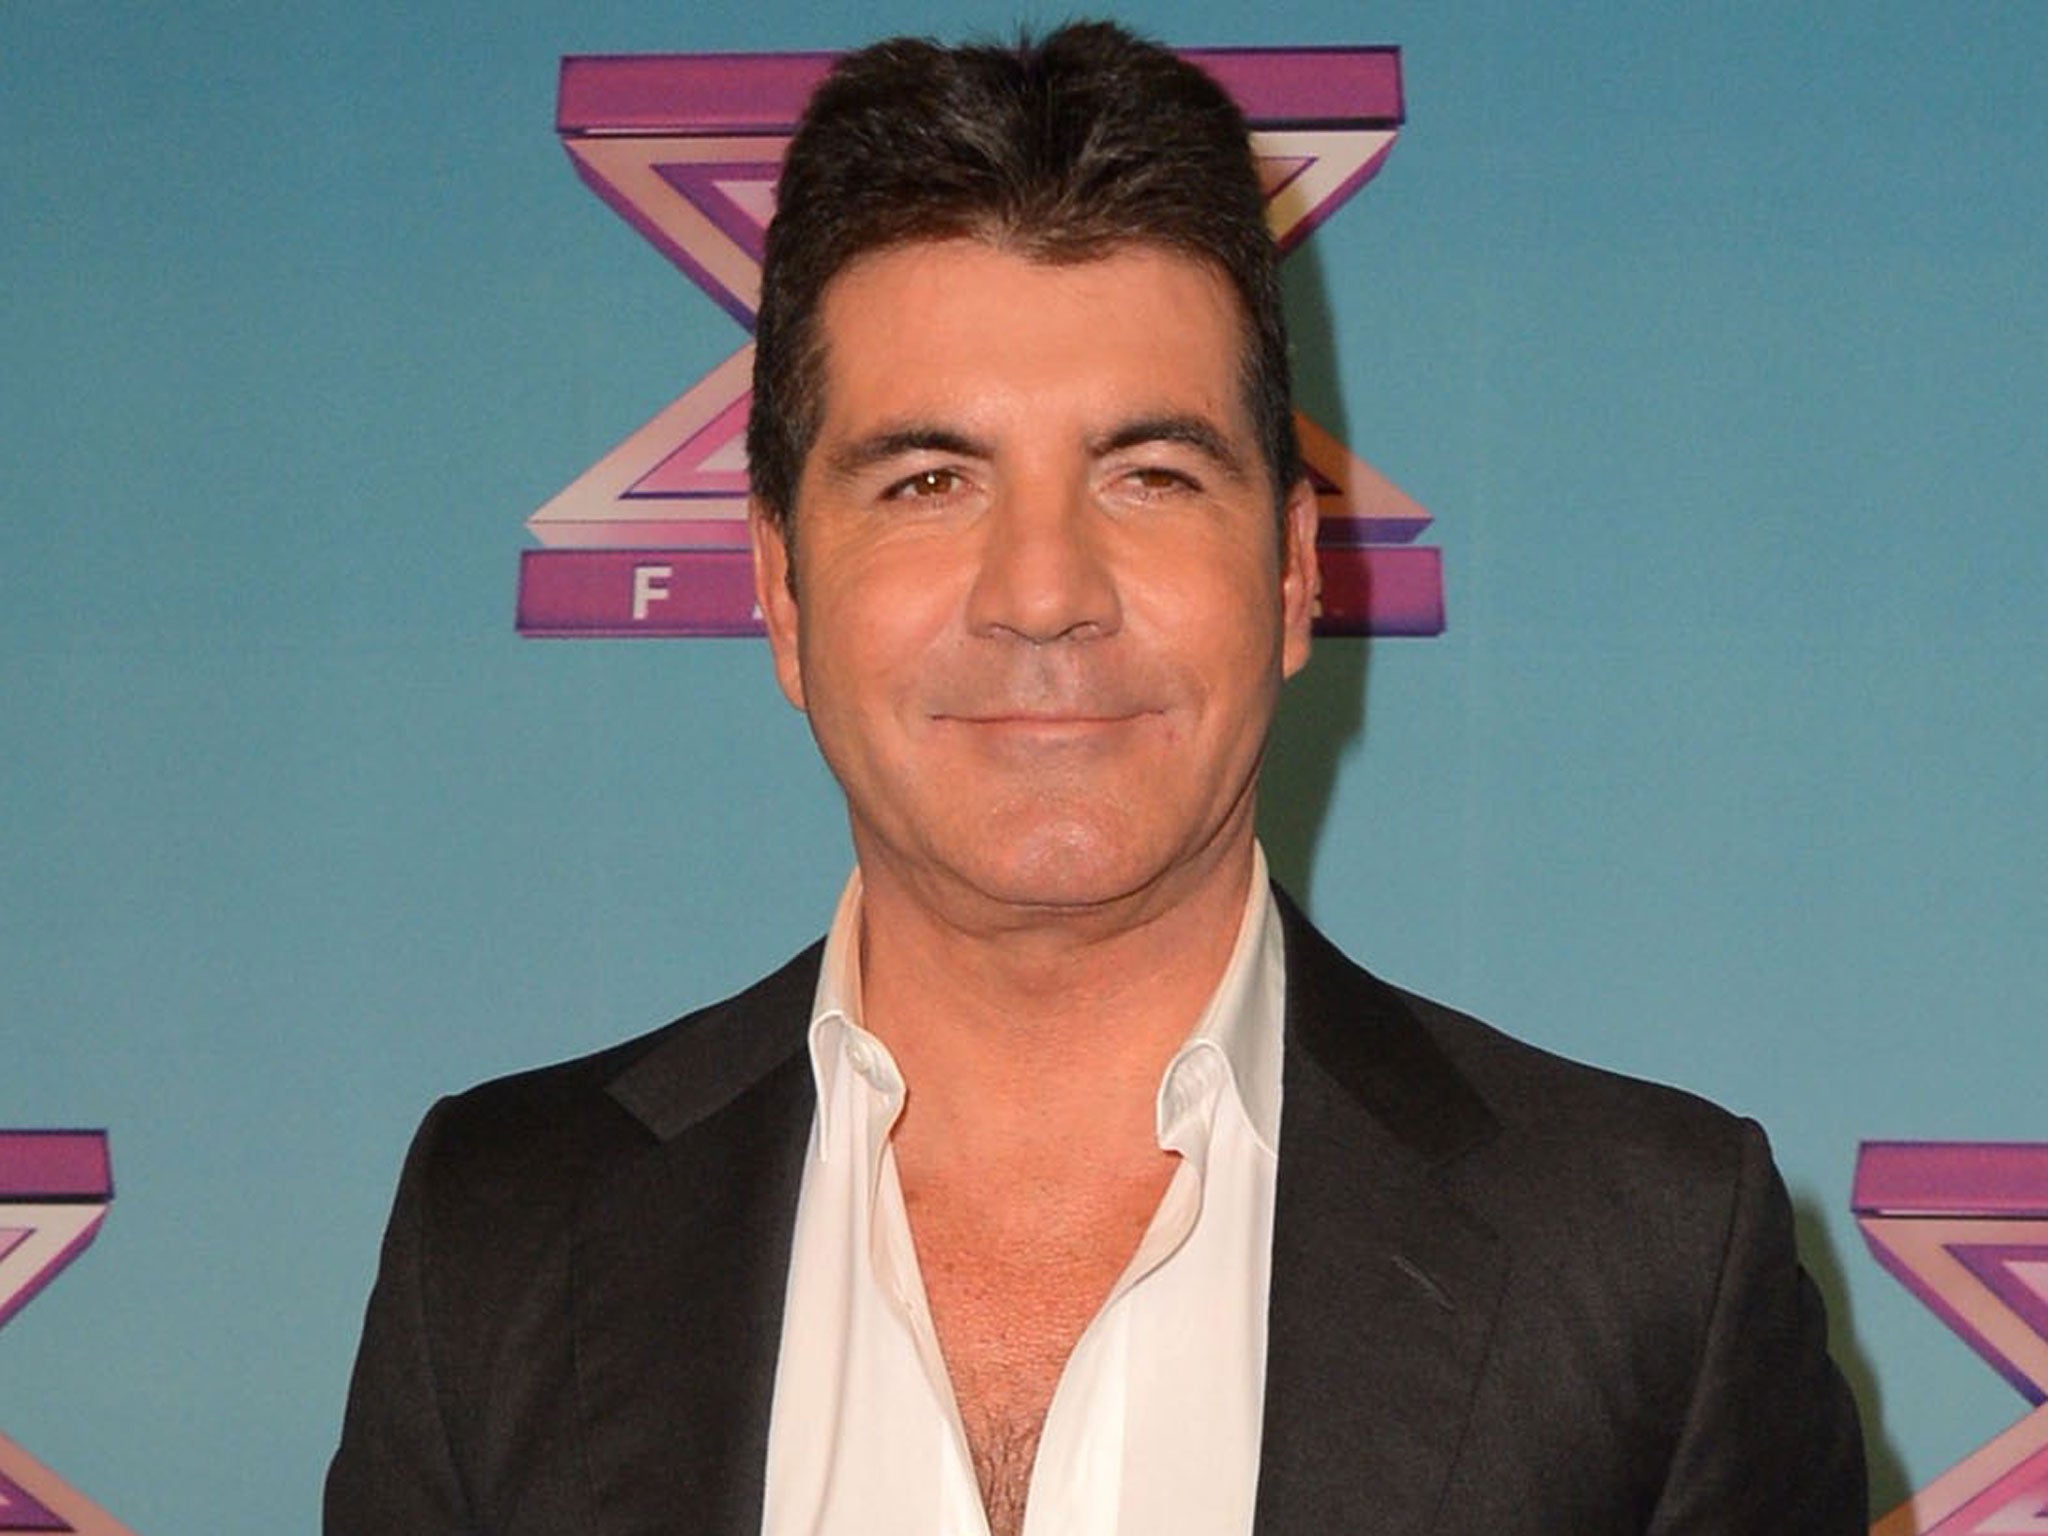 Simon Cowell has confirmed there will be changes to this year's X Factor